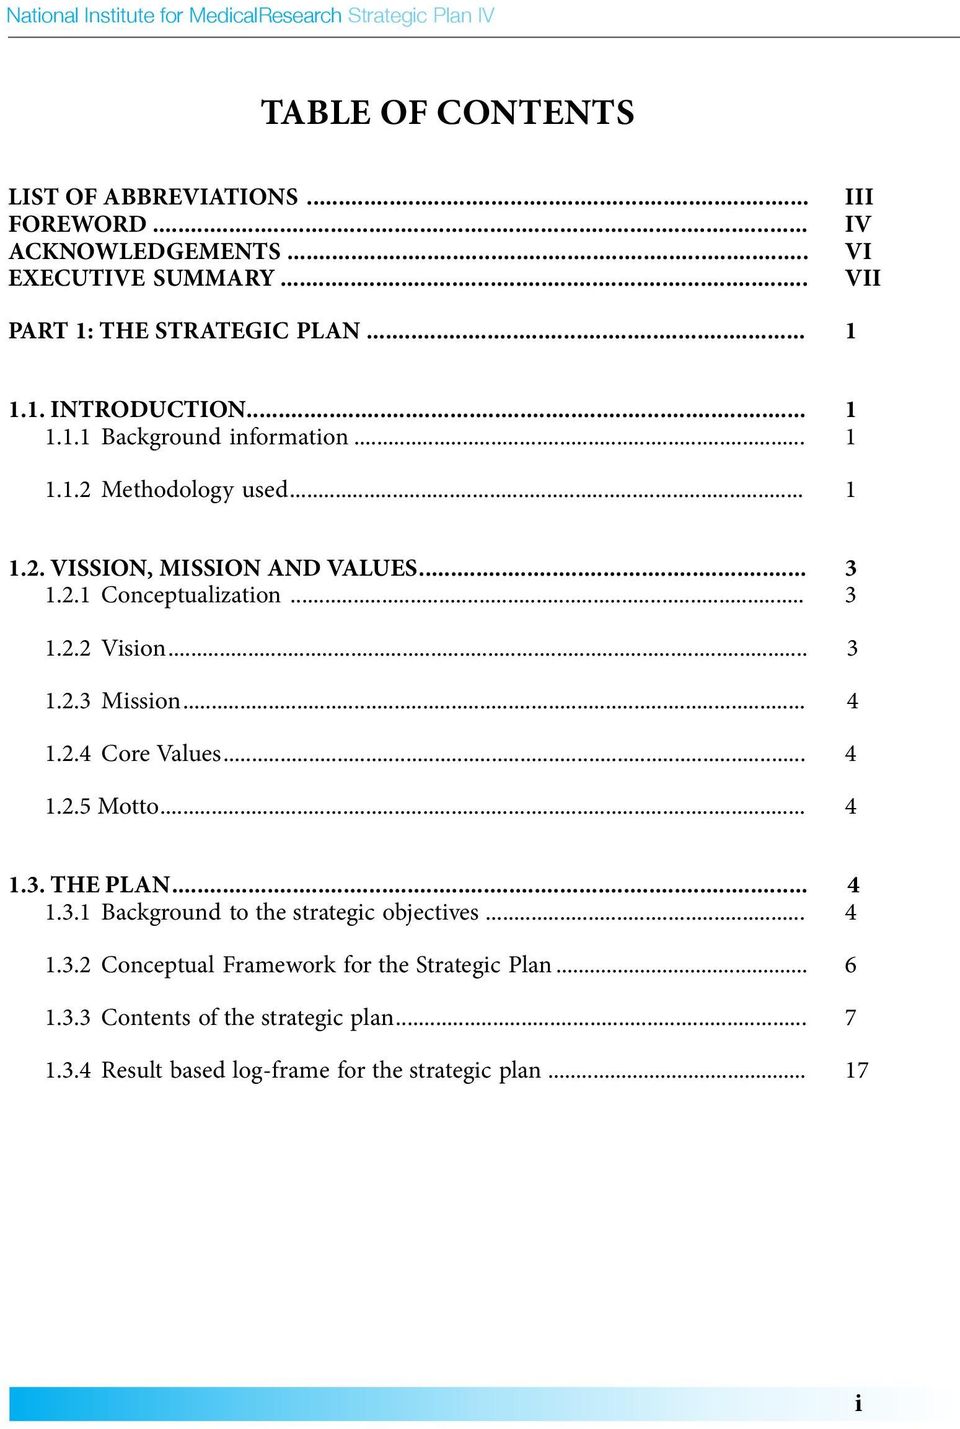 .. 3 1.2.3 Mission... 4 1.2.4 Core Values... 4 1.2.5 Motto... 4 1.3. THE PLAN... 4 1.3.1 Background to the strategic objectives... 4 1.3.2 Conceptual Framework for the Strategic Plan.